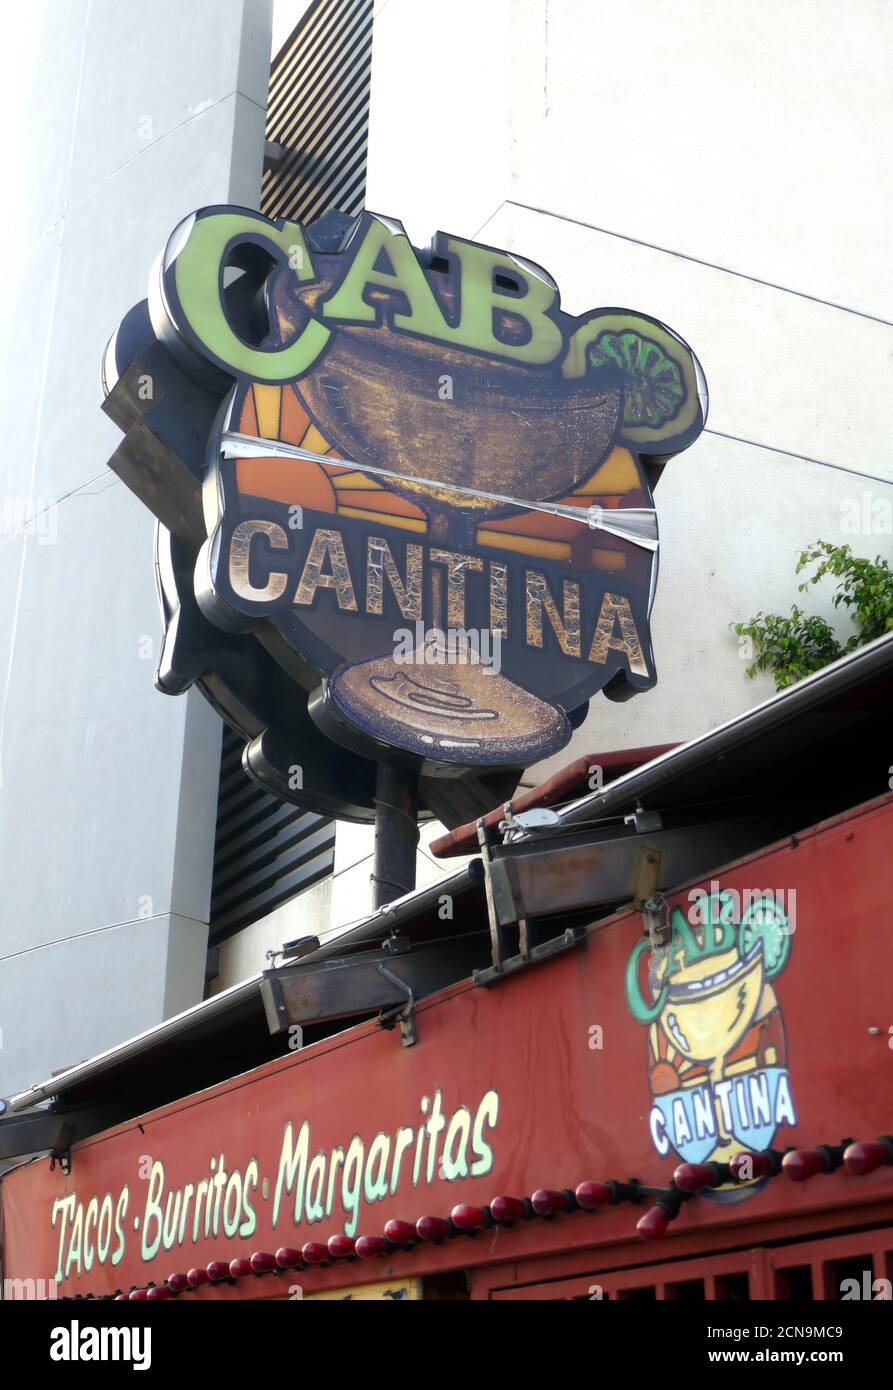 Los Angeles, California, USA 17th September 2020 A general view of Cabo Cantina Restaurant where 'Annie Hall' filmed on Sunset Blvd on September 17, 2020 in Los Angeles, California, USA. Photo by Barry King/Alamy Stock Photo Stock Photo